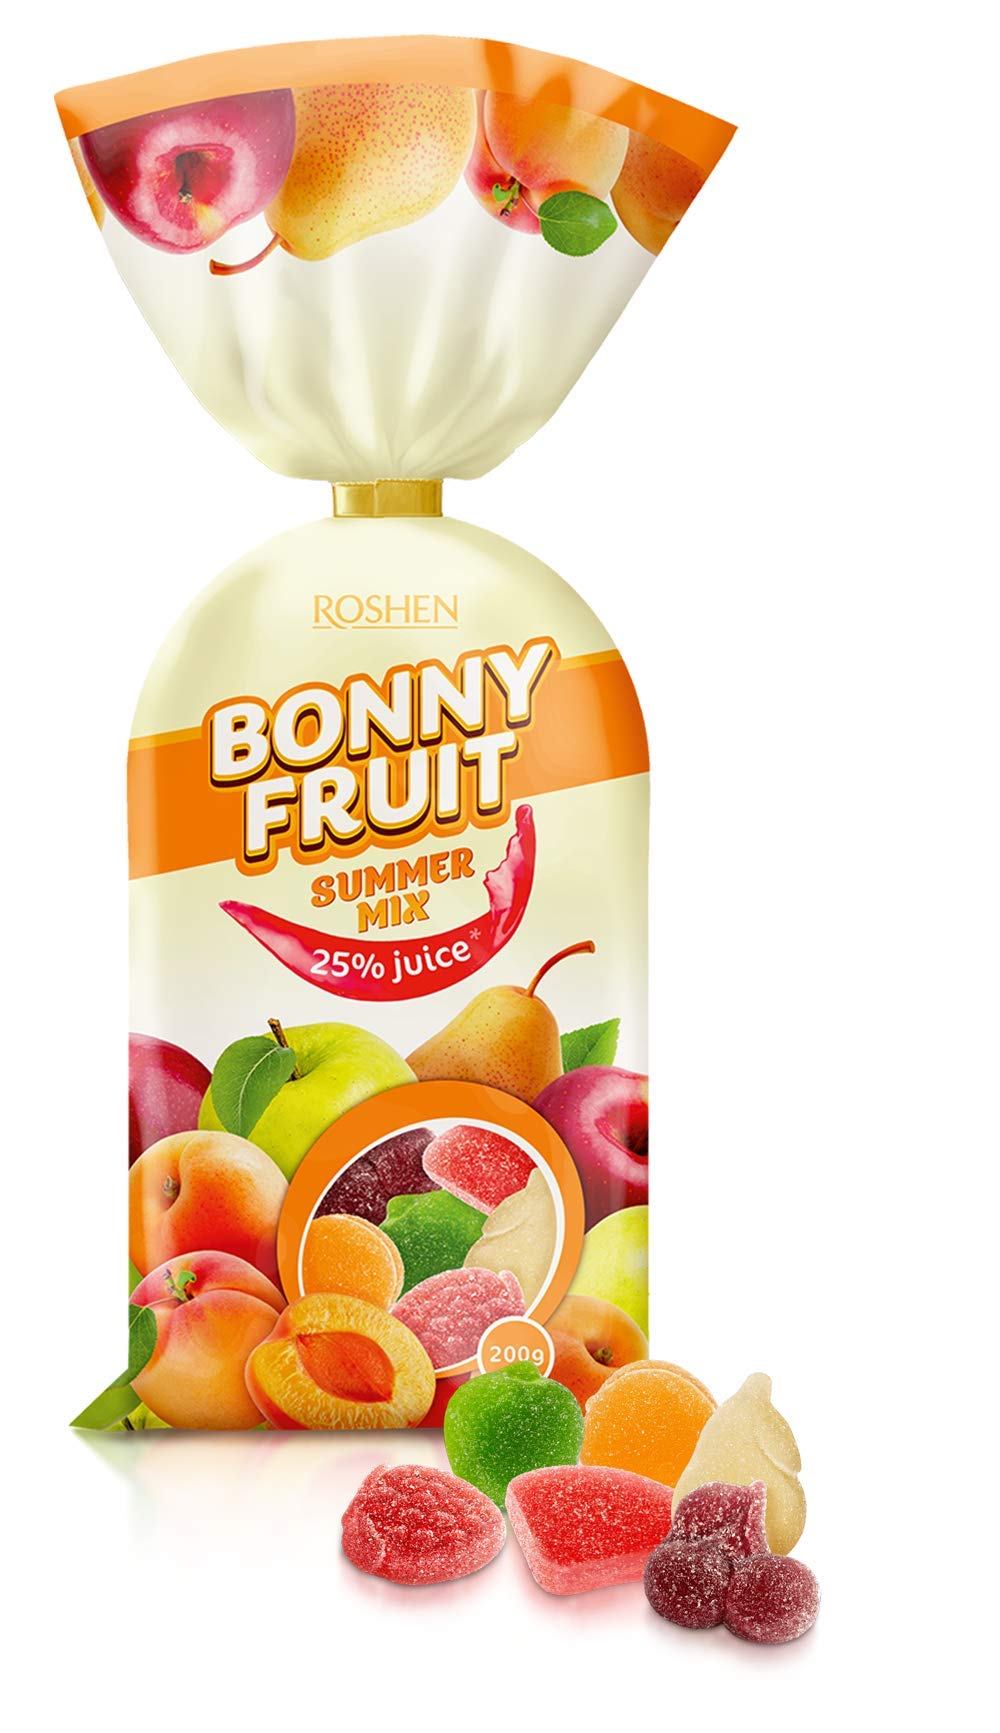 Roshen Bonny Fruits Jelly Candies with Summer Mix Flavor - 200g